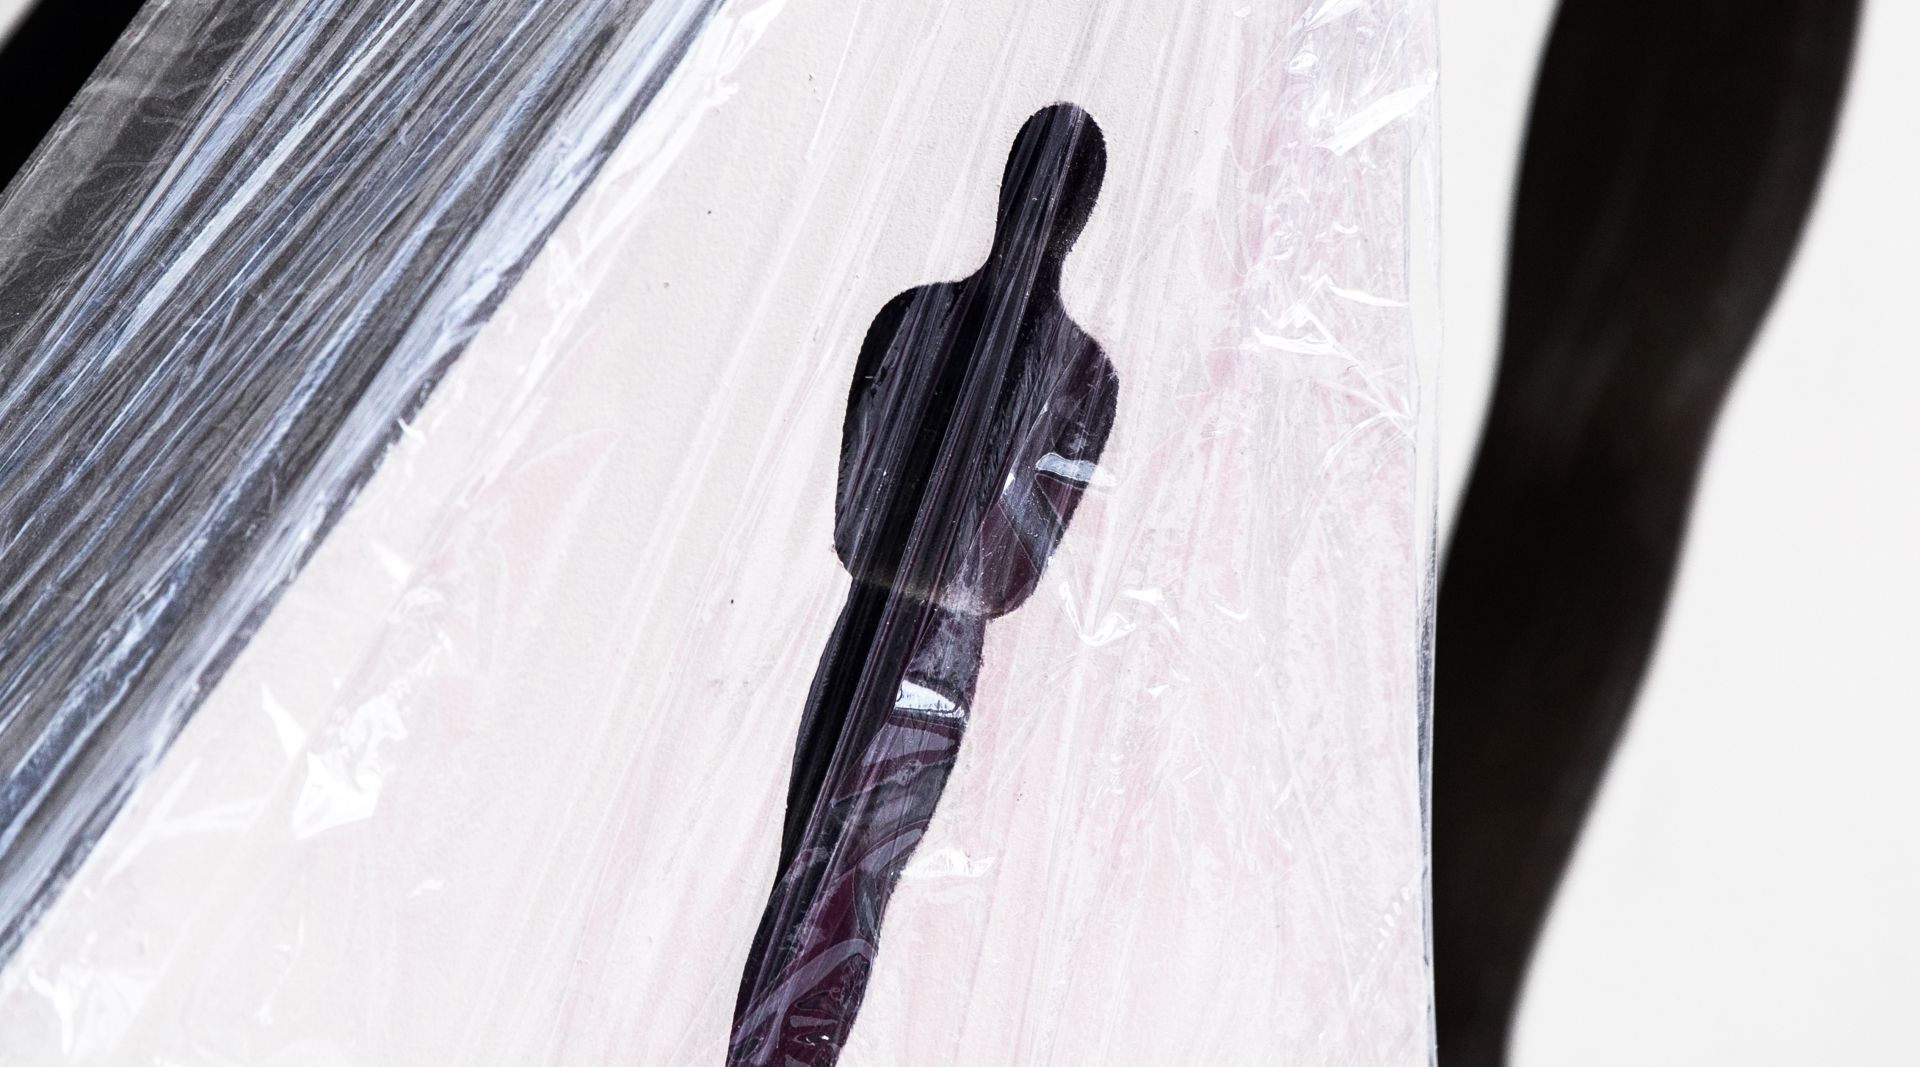 epa07383982 A wrapped 'Oscar' silhouette is displayed in the red carpet area as the preparations for the 91st annual Academy Awards ceremony get underway in Hollywood, California, USA, 20 February 2019. The Oscars are presented for outstanding individual or collective efforts in 24 categories in filmmaking.  EPA/ETIENNE LAURENT *** Local Caption *** 54174449